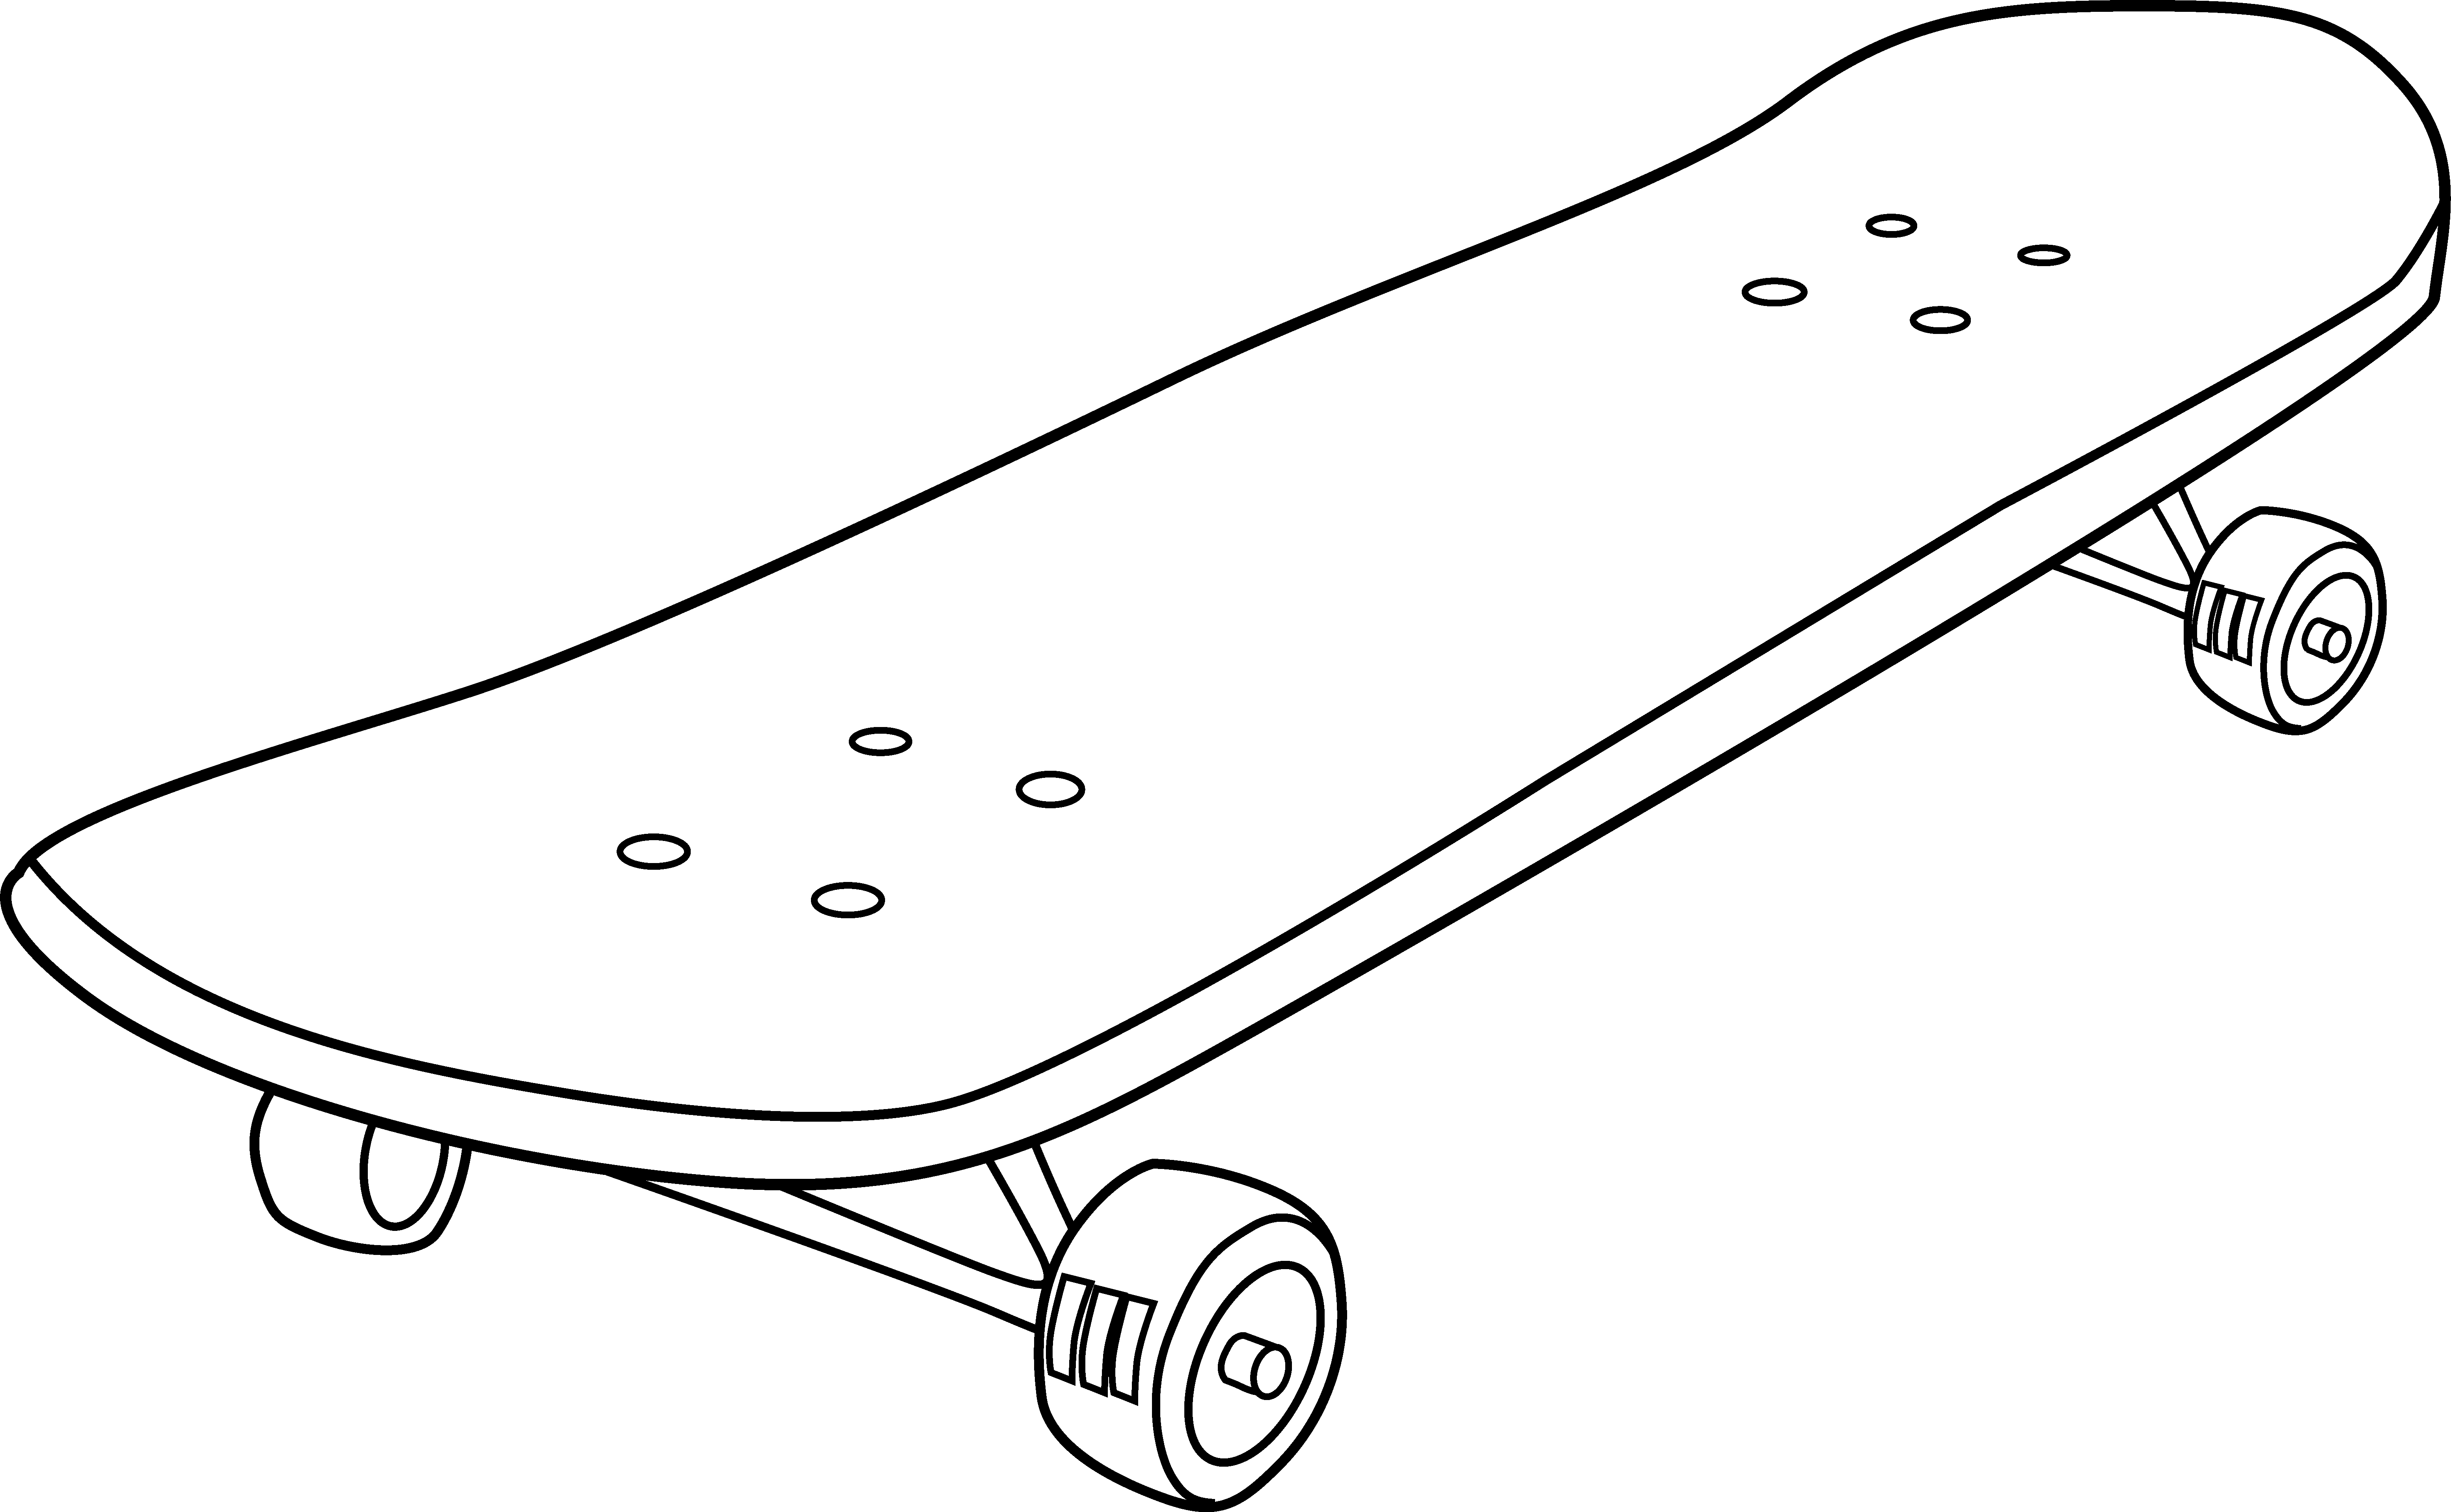 Skateboard Coloring Page - Free Clip Art